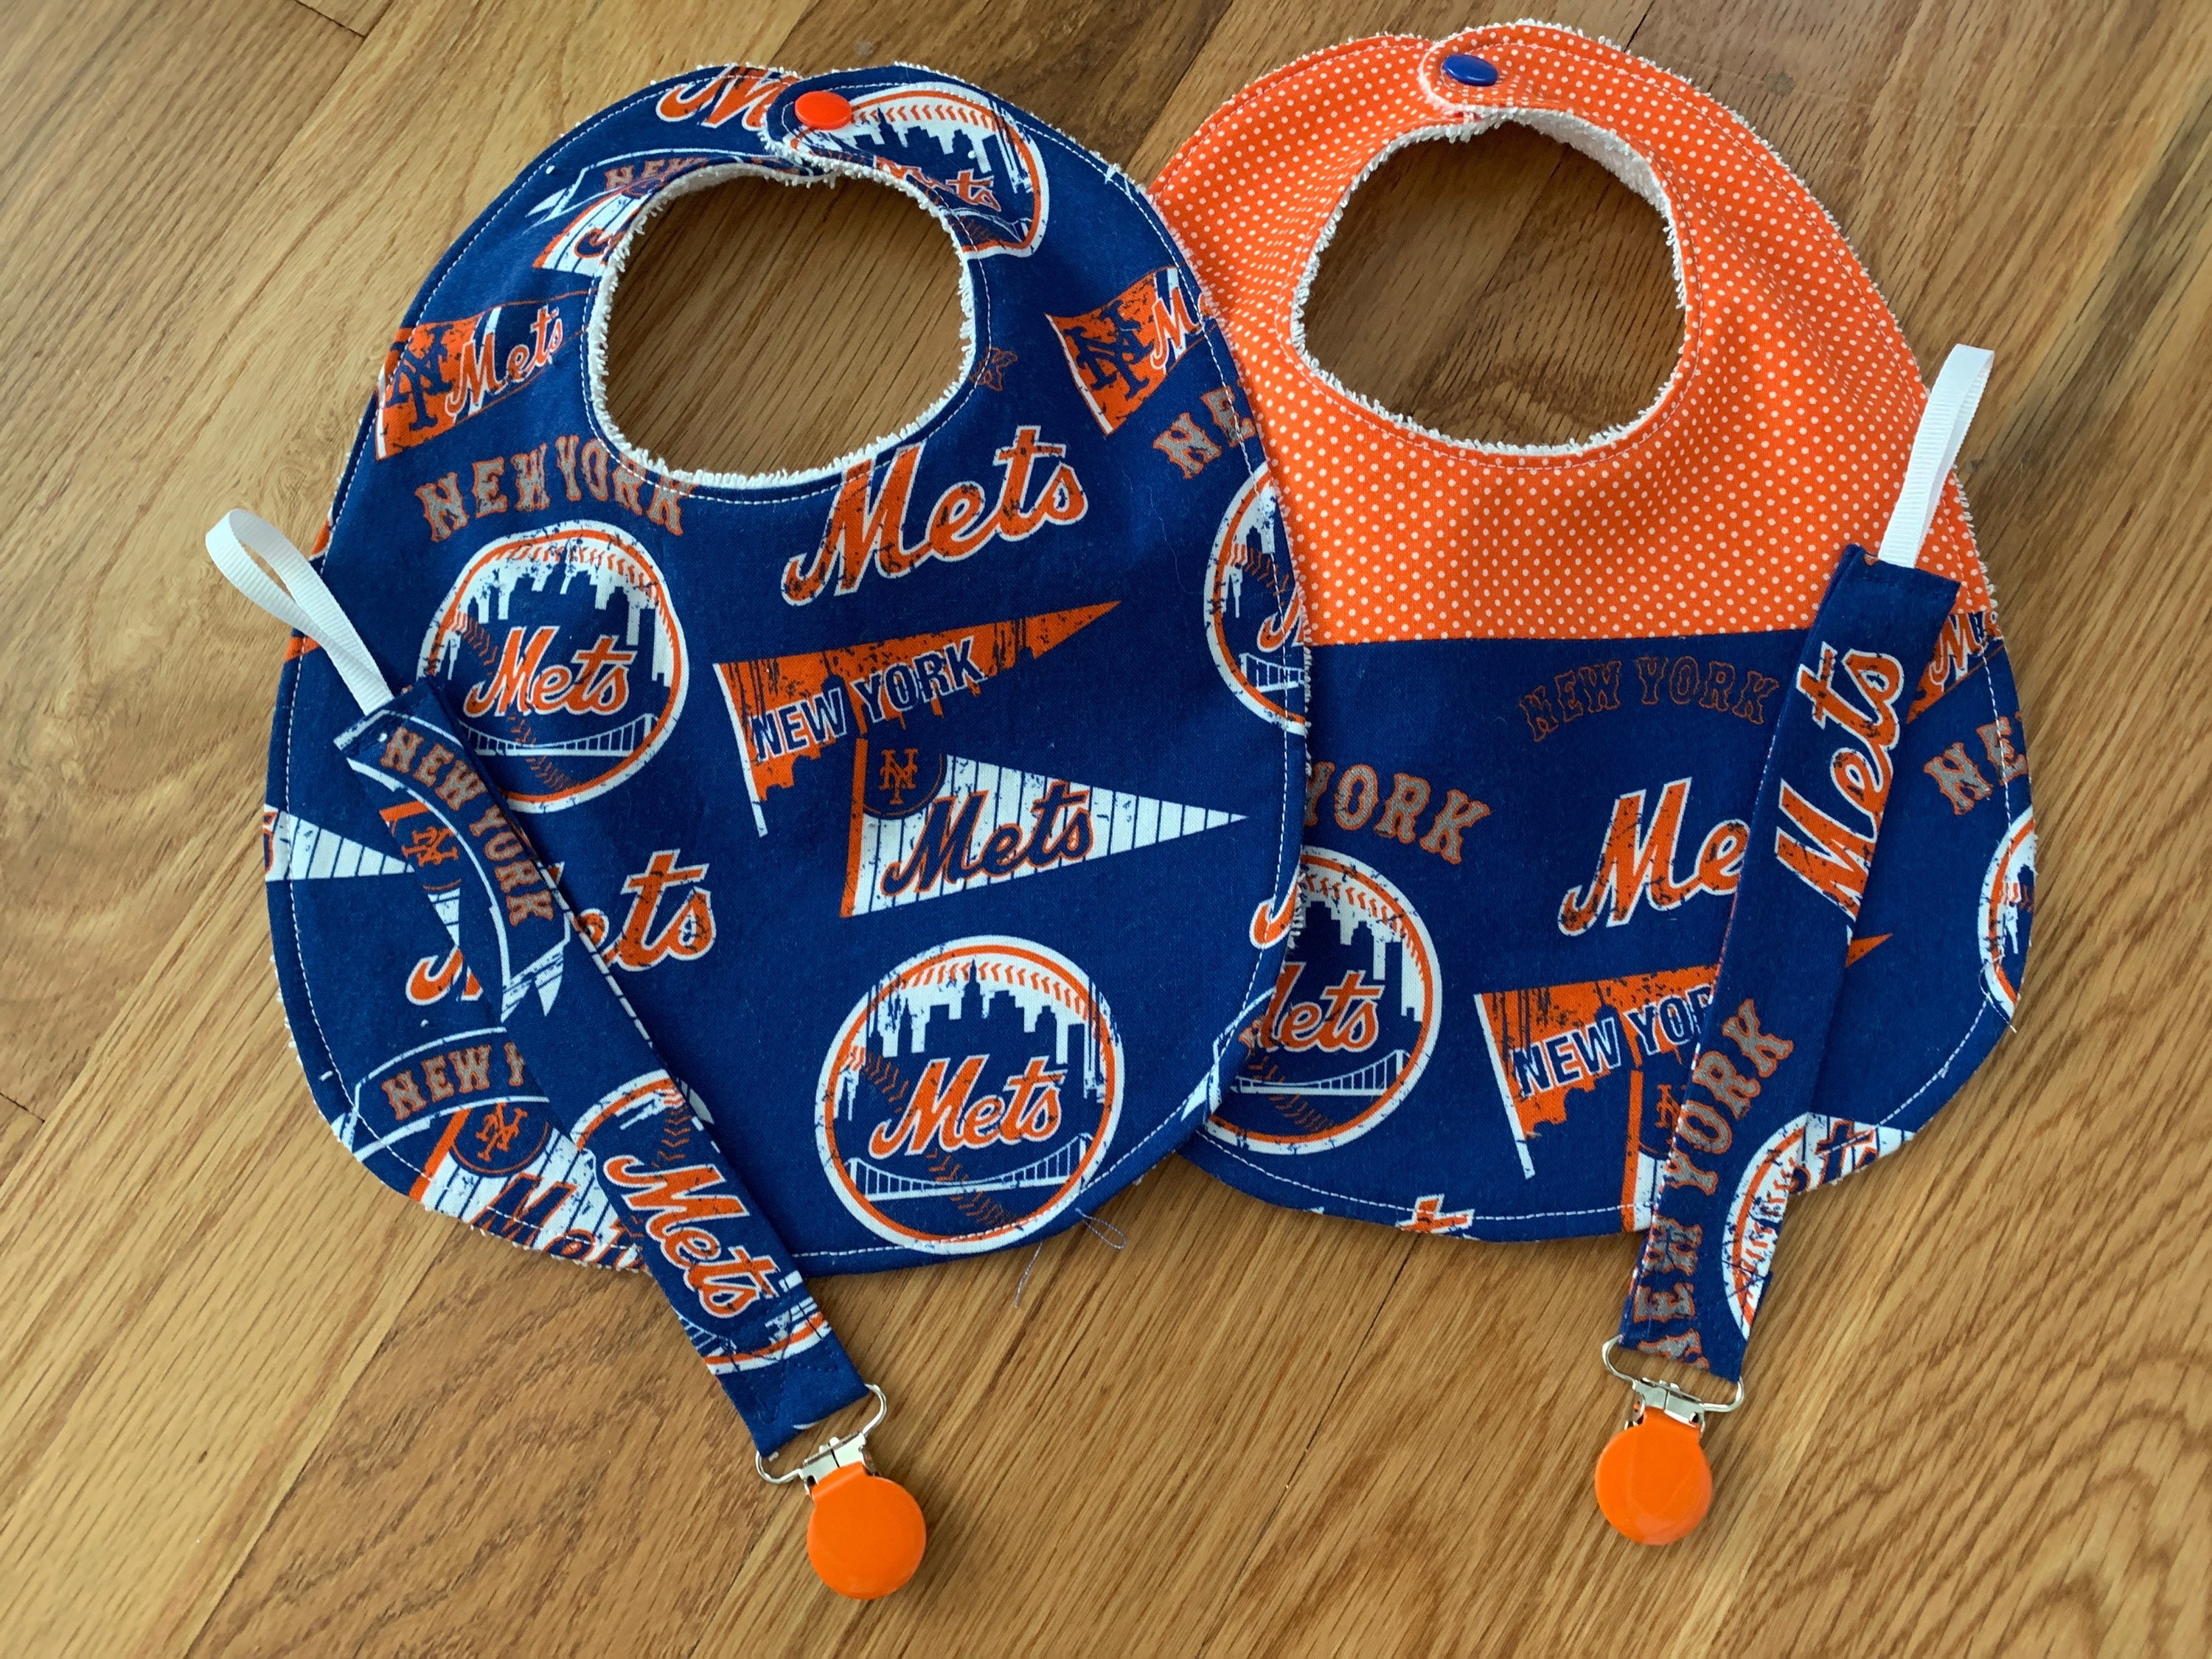 Mets Baby Outfit, Mets Girl's Outfit, Mets, Mets Newborn Outfit, Mets Fan,  Mets Baby, Mets Girl, Newborn Gift, Father's Day Gift, Mets Shirt